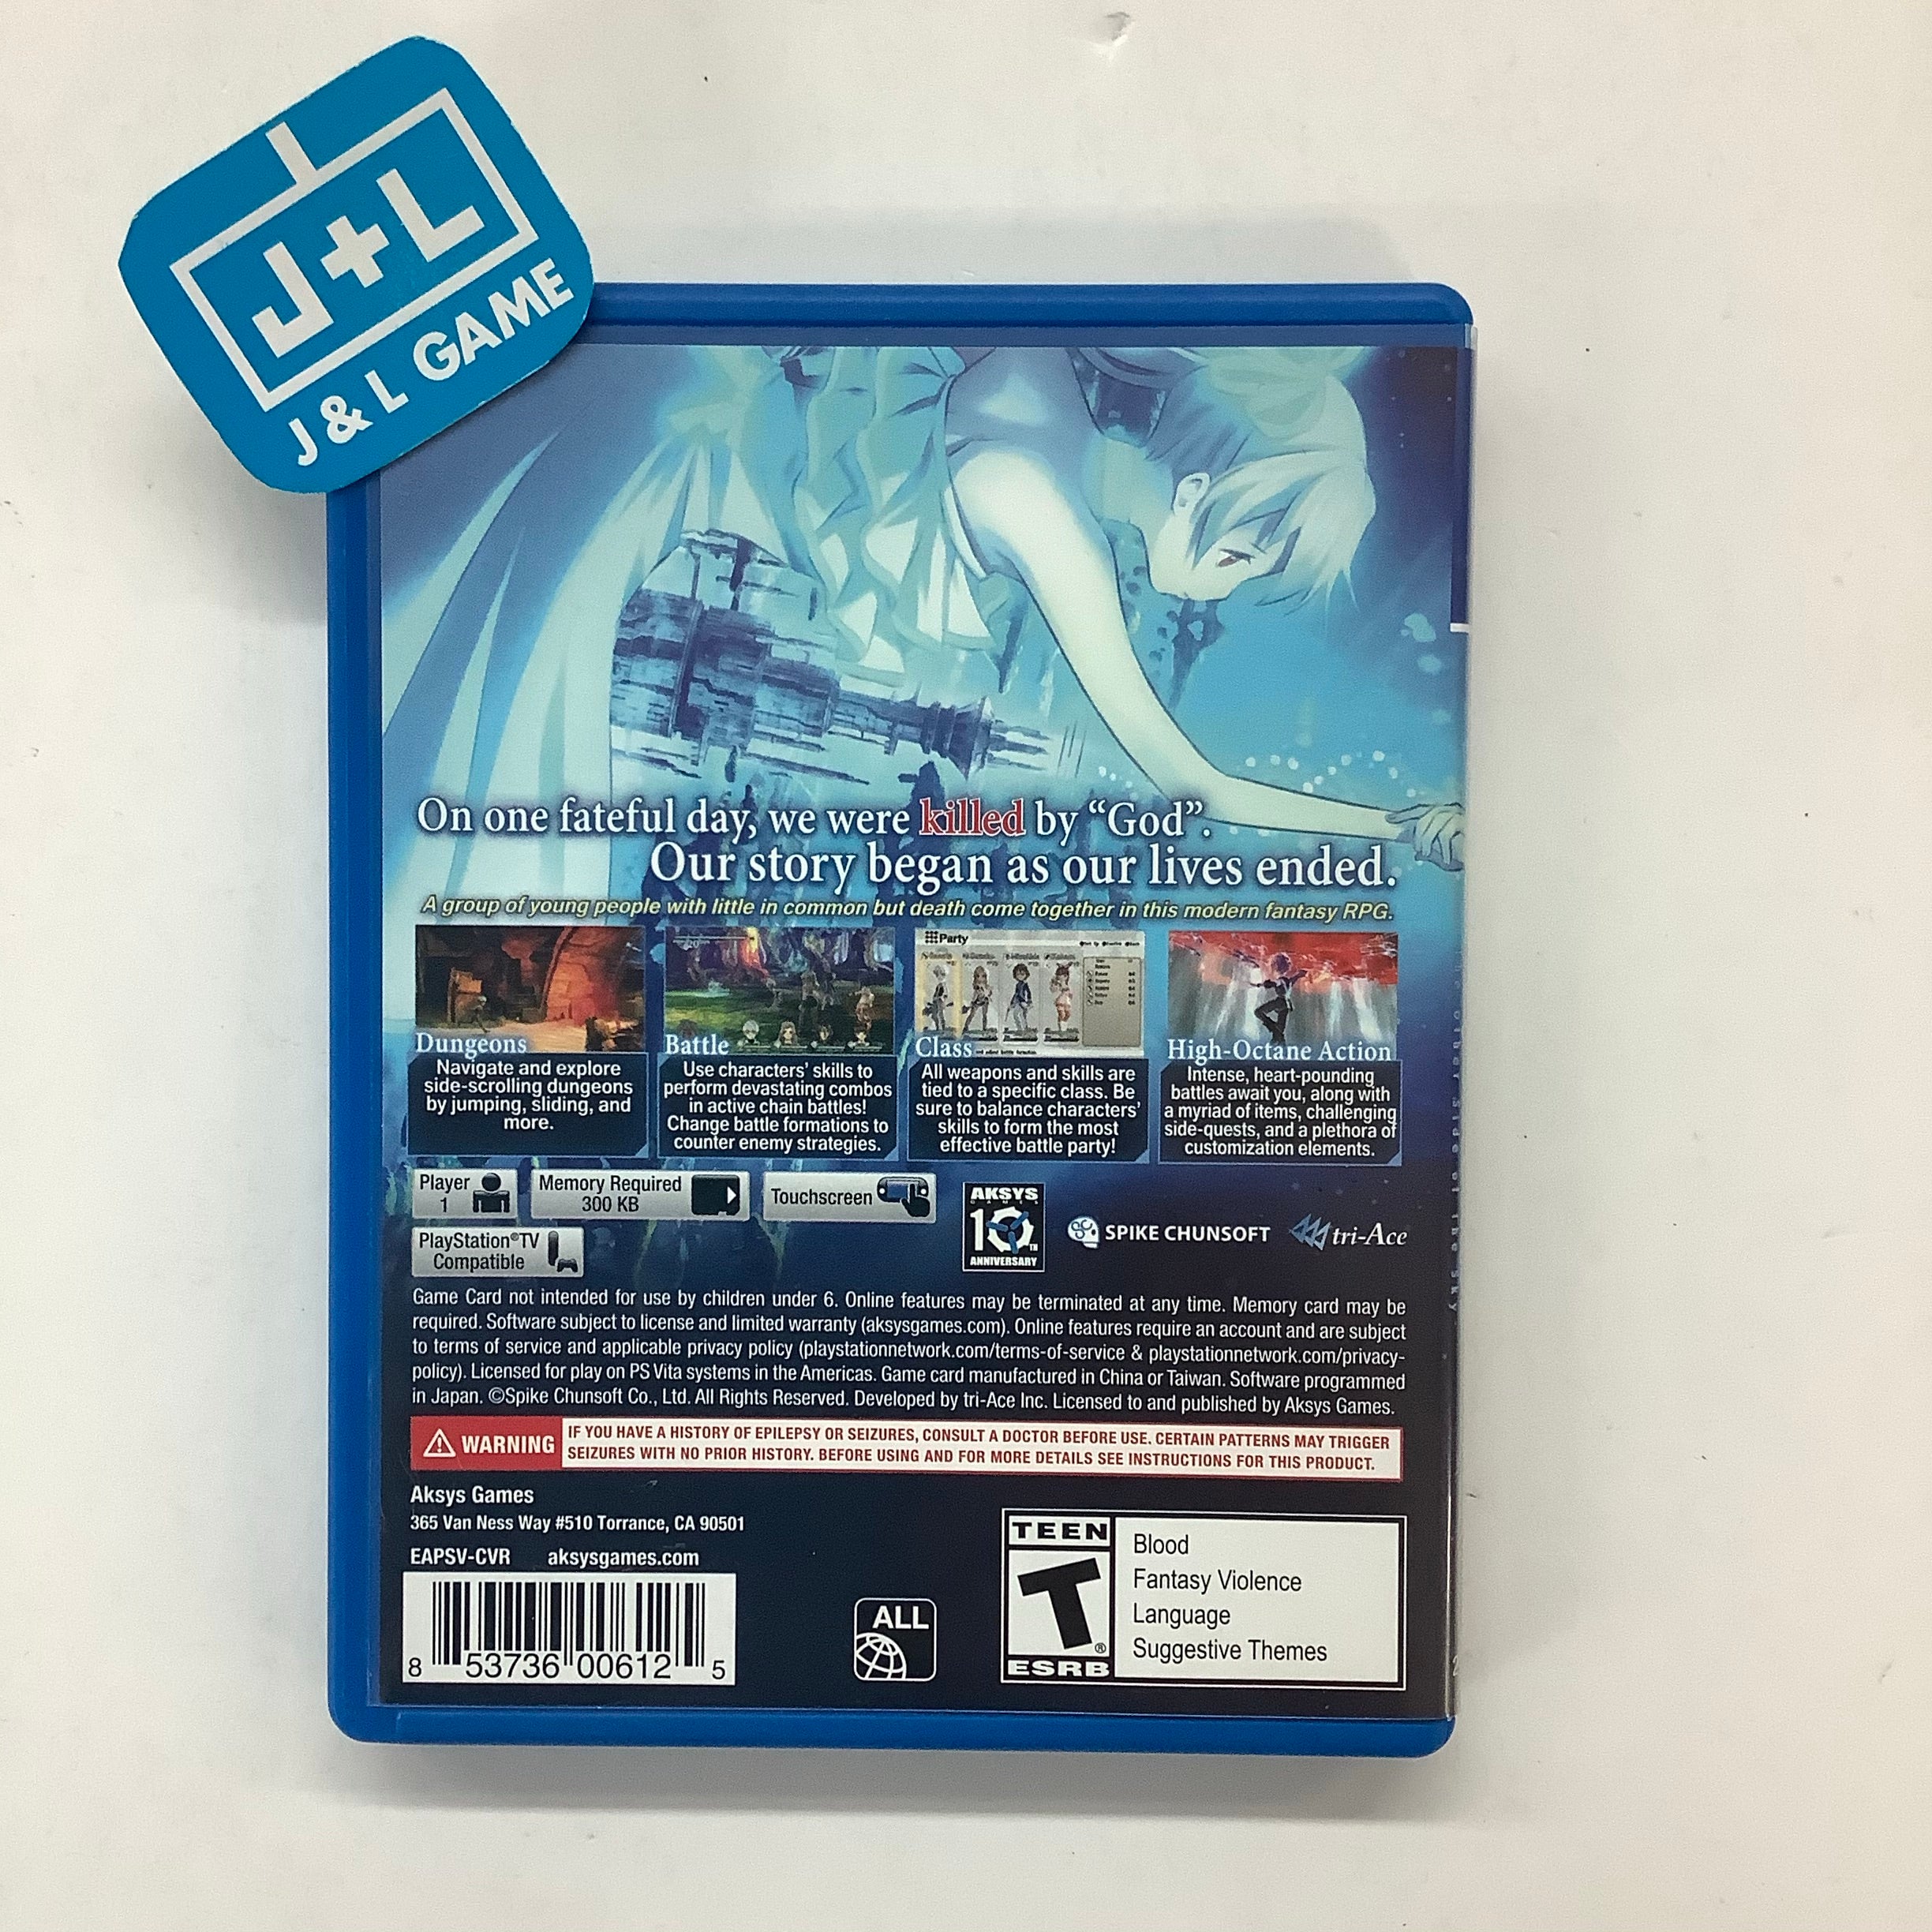 Exist Archive: The Other Side of the Sky - (PSV) PlayStation Vita [Pre-Owned] Video Games Aksys   